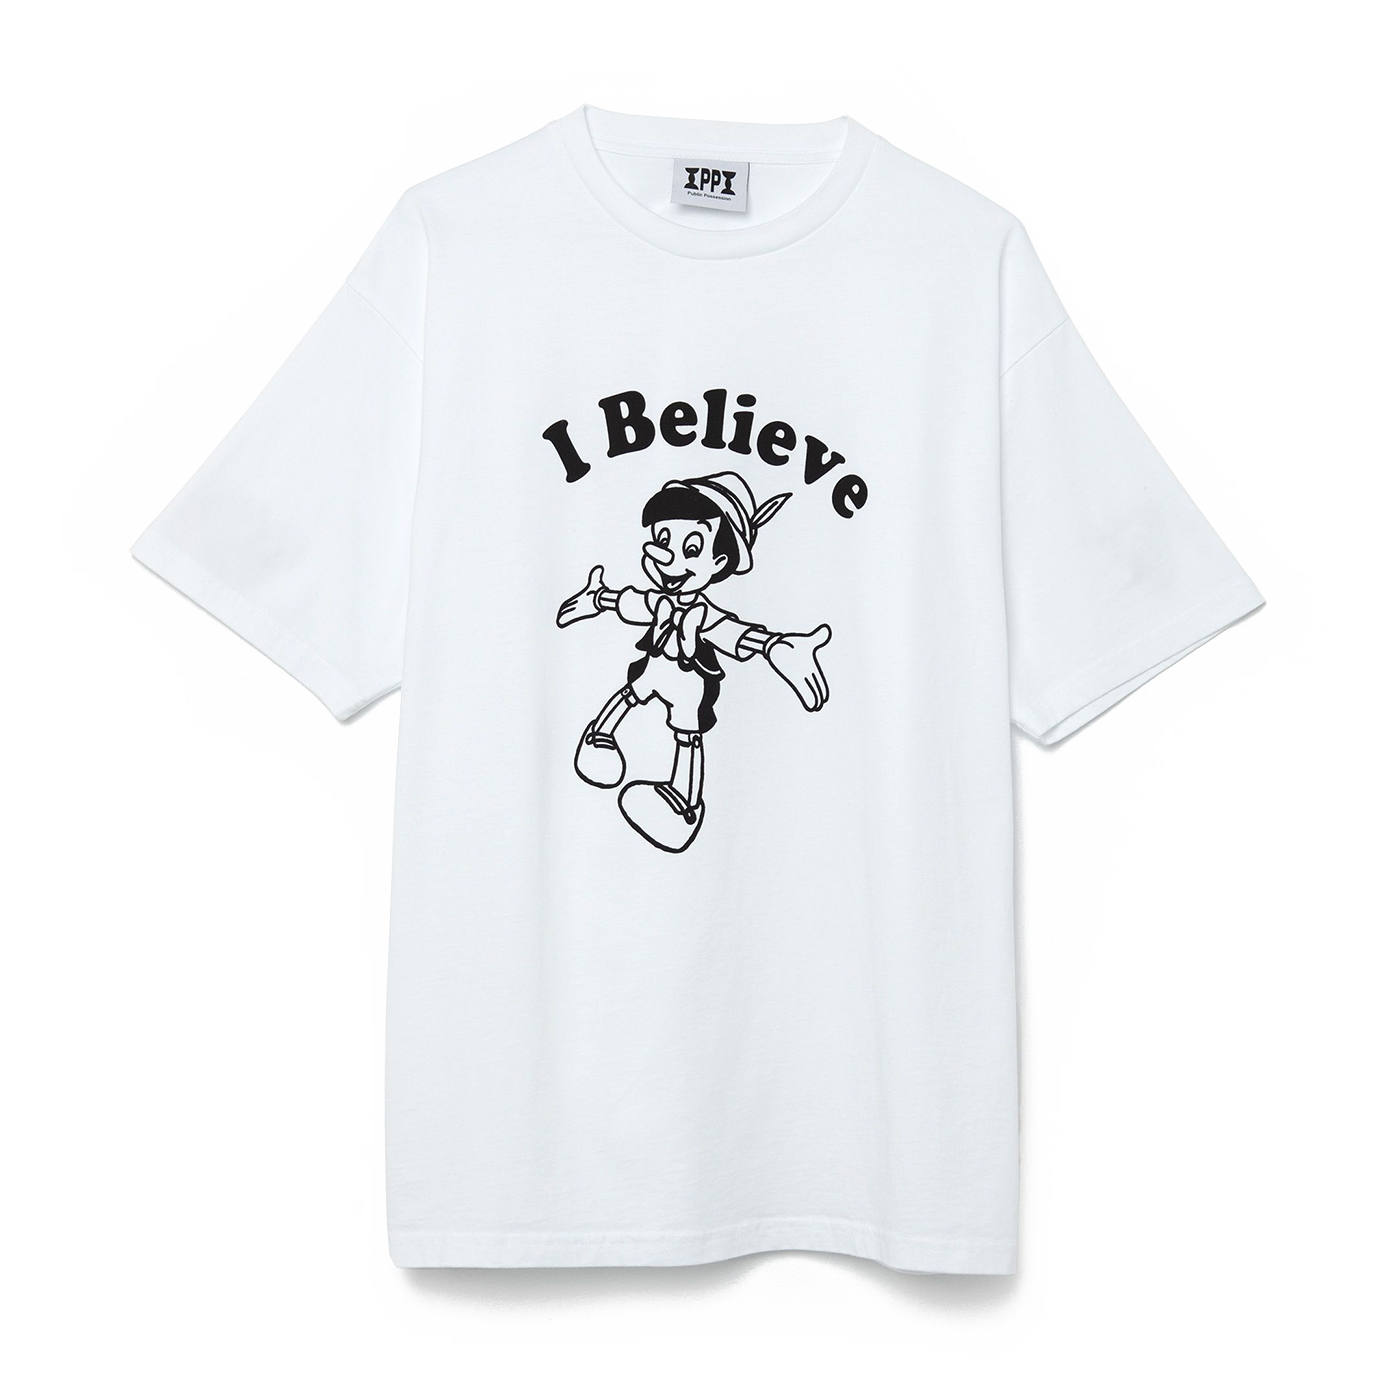 I Don't Believe T-Shirt